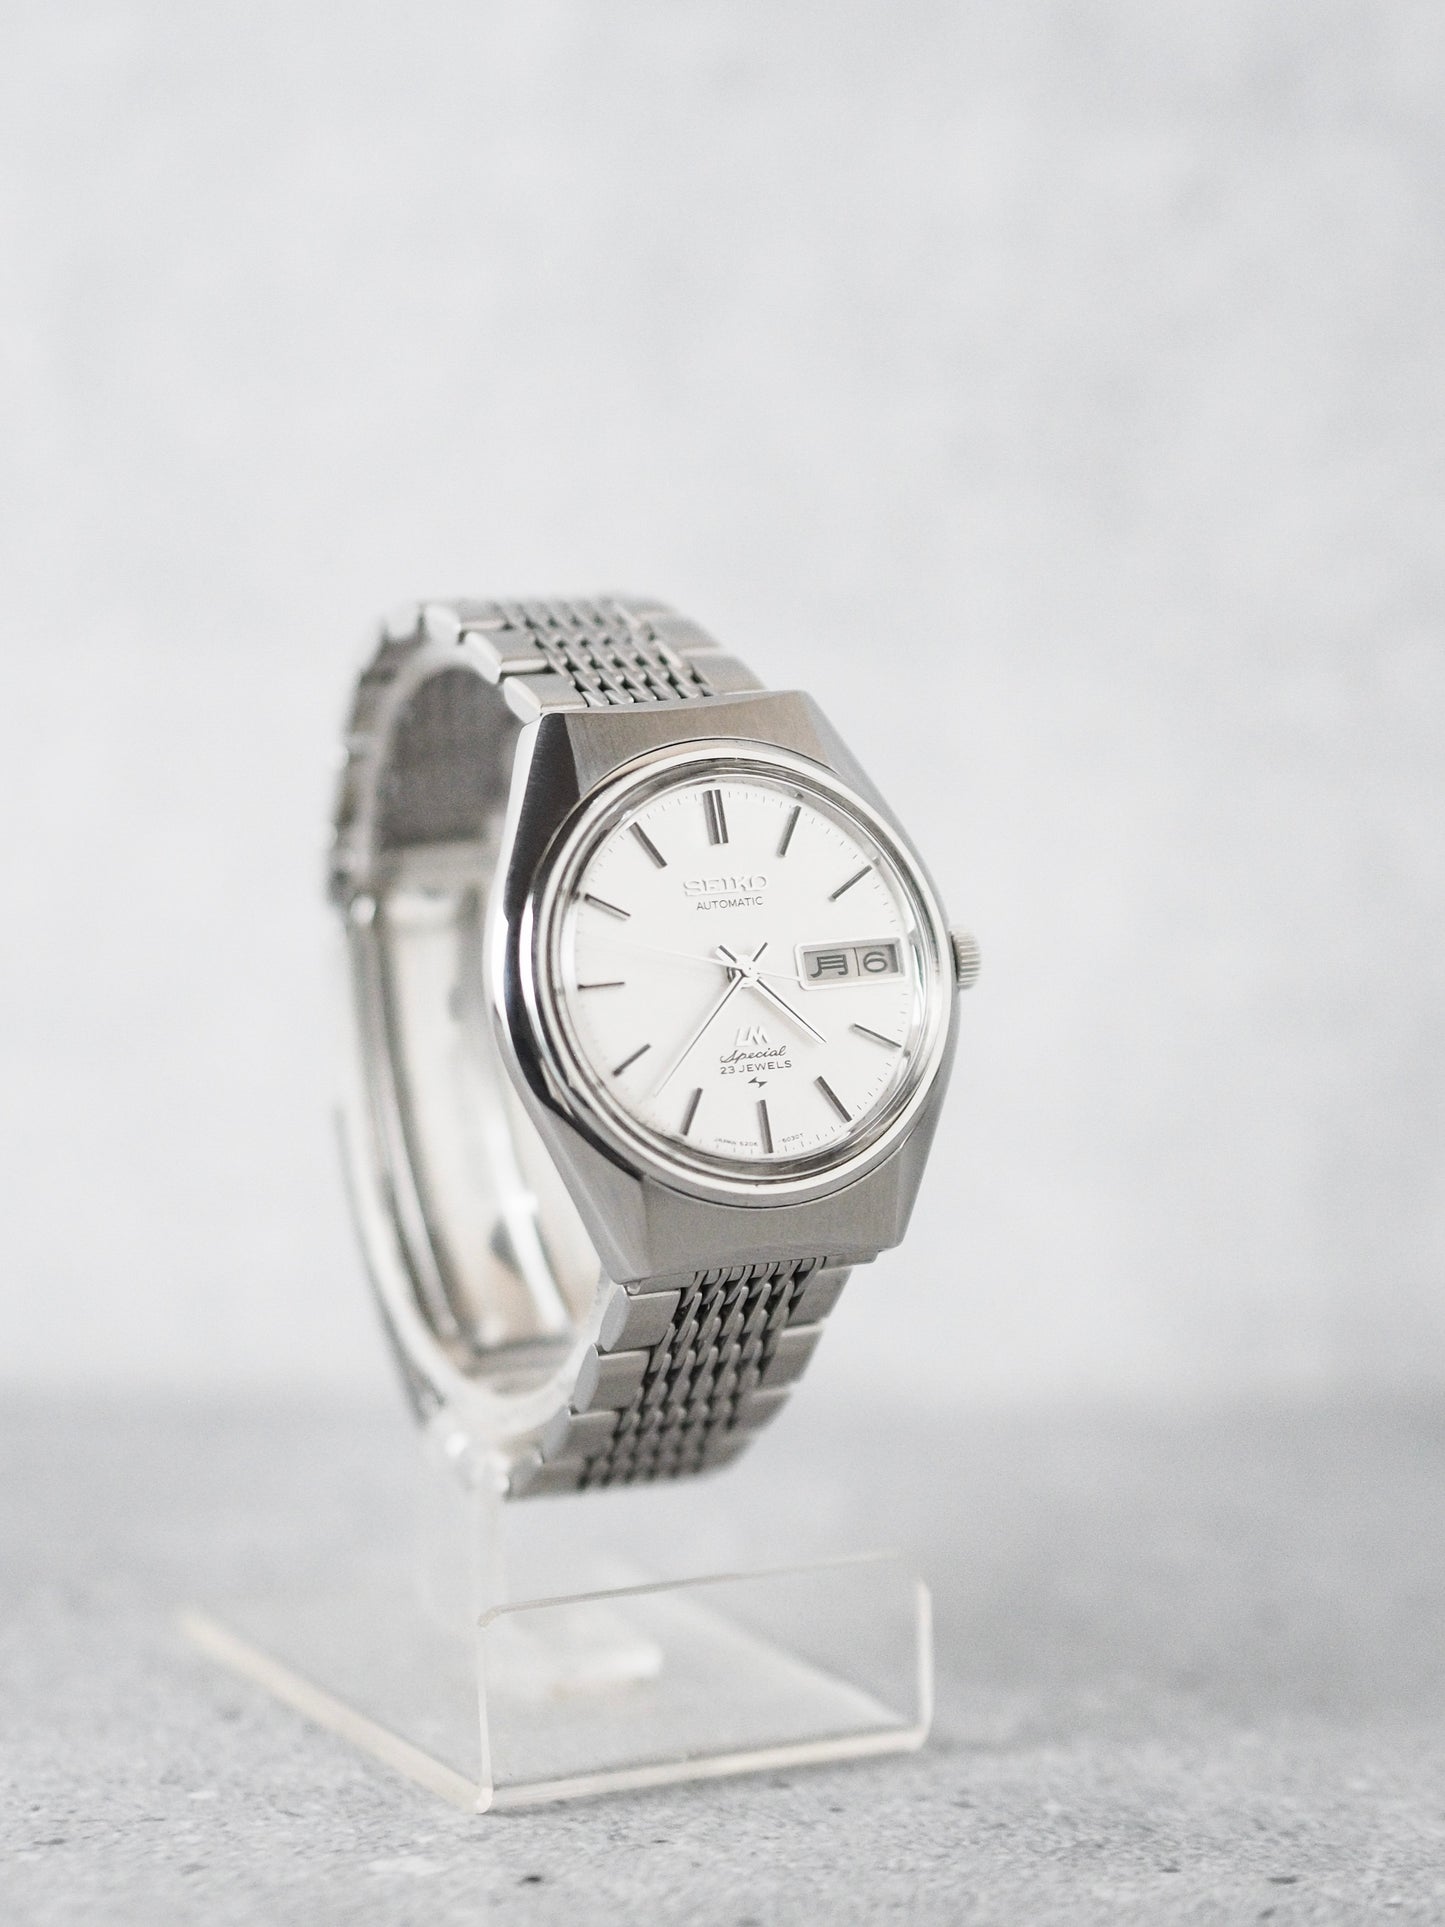 Seiko LM 5206-6051 Lord Matic Special White Sunburst Dial